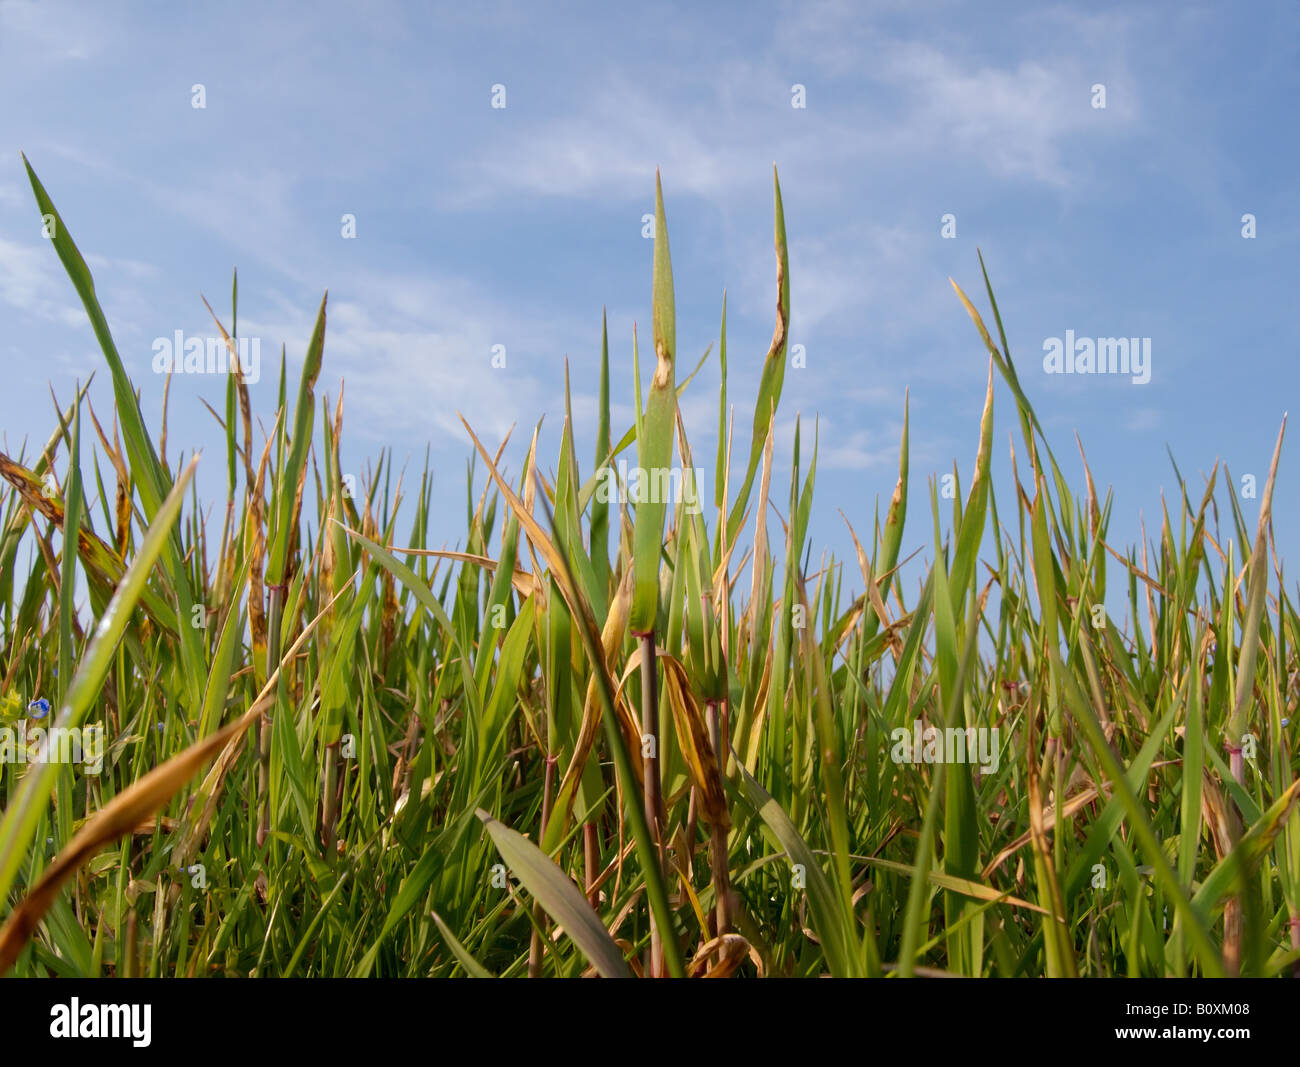 Green Grass Blue Sky Seen From Ground Level Stock Photo